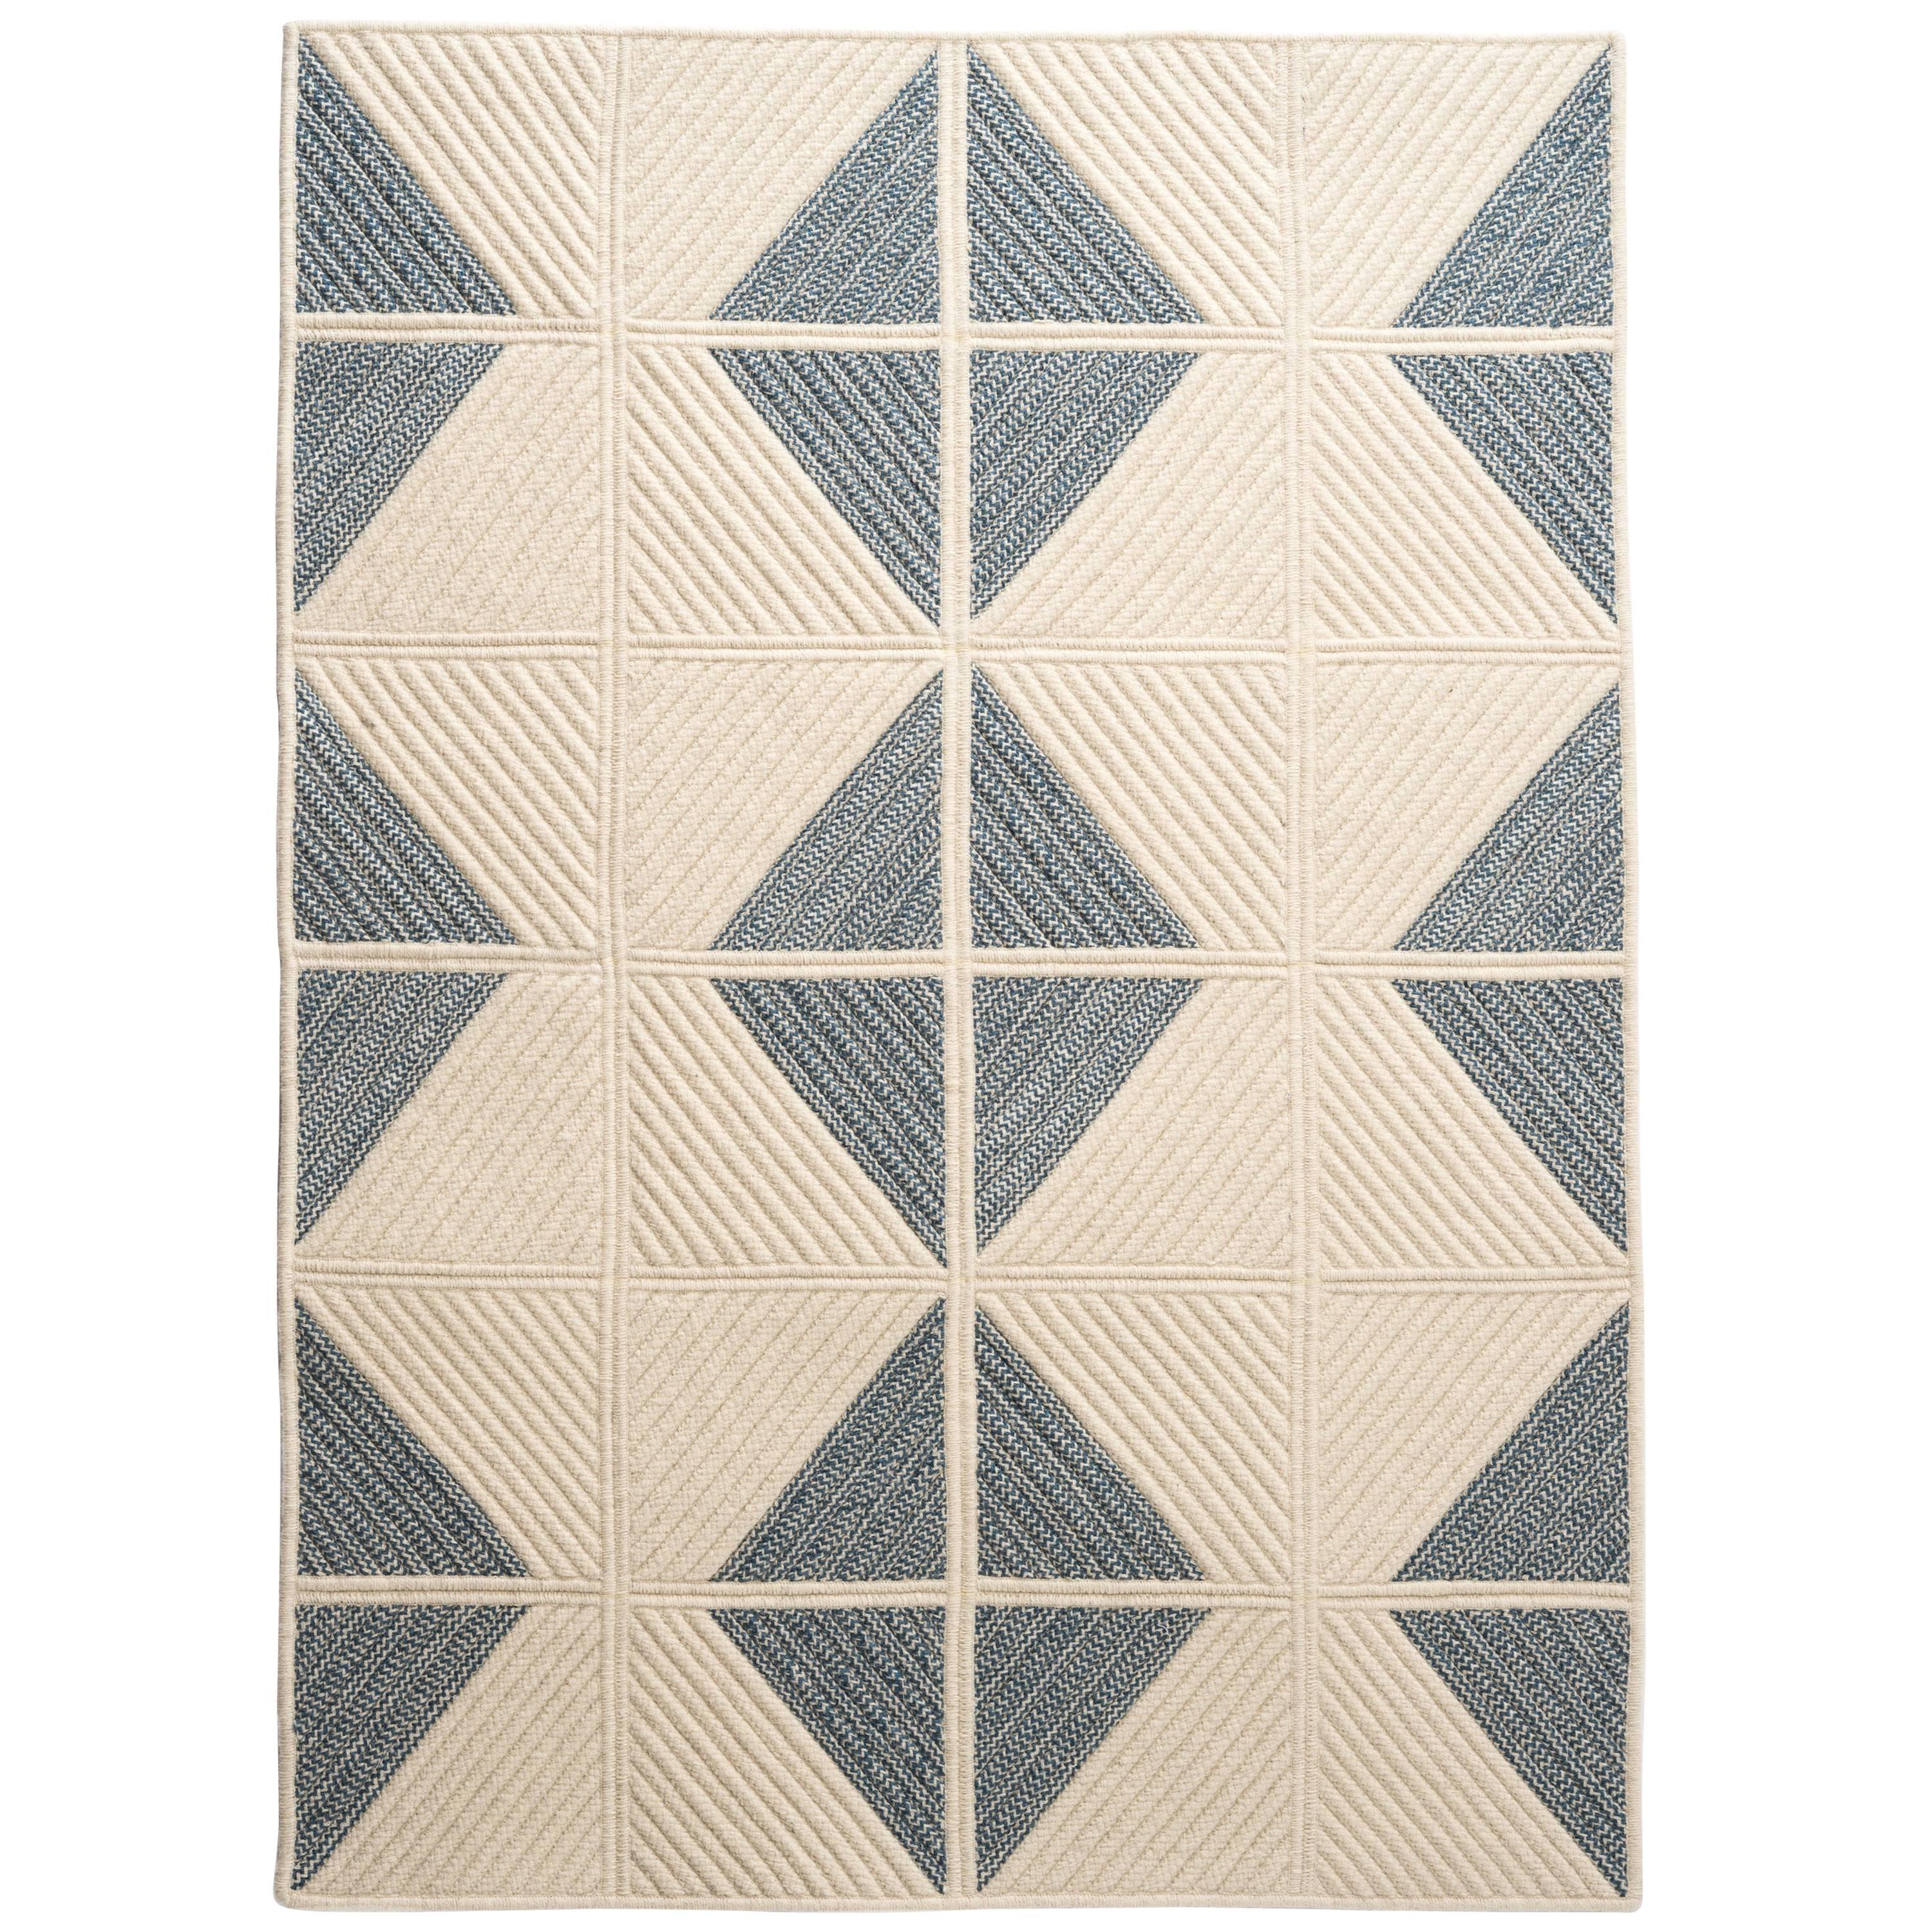 Sketch Woven Wool Rug in Blue & Cream, Custom Made in the USA For Sale